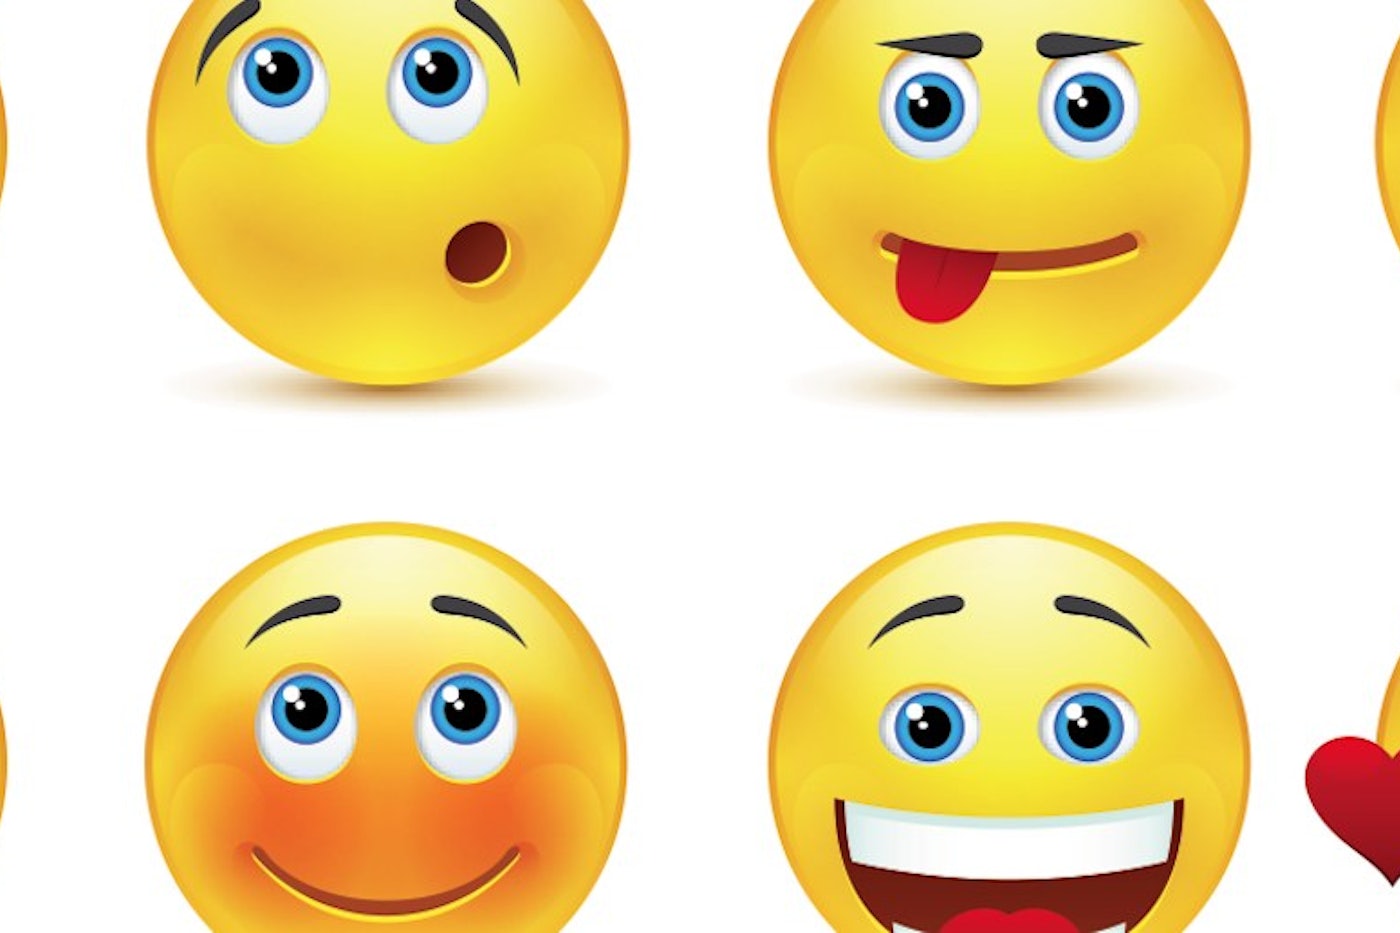 Faces two meaning smiley 😃 Emoji